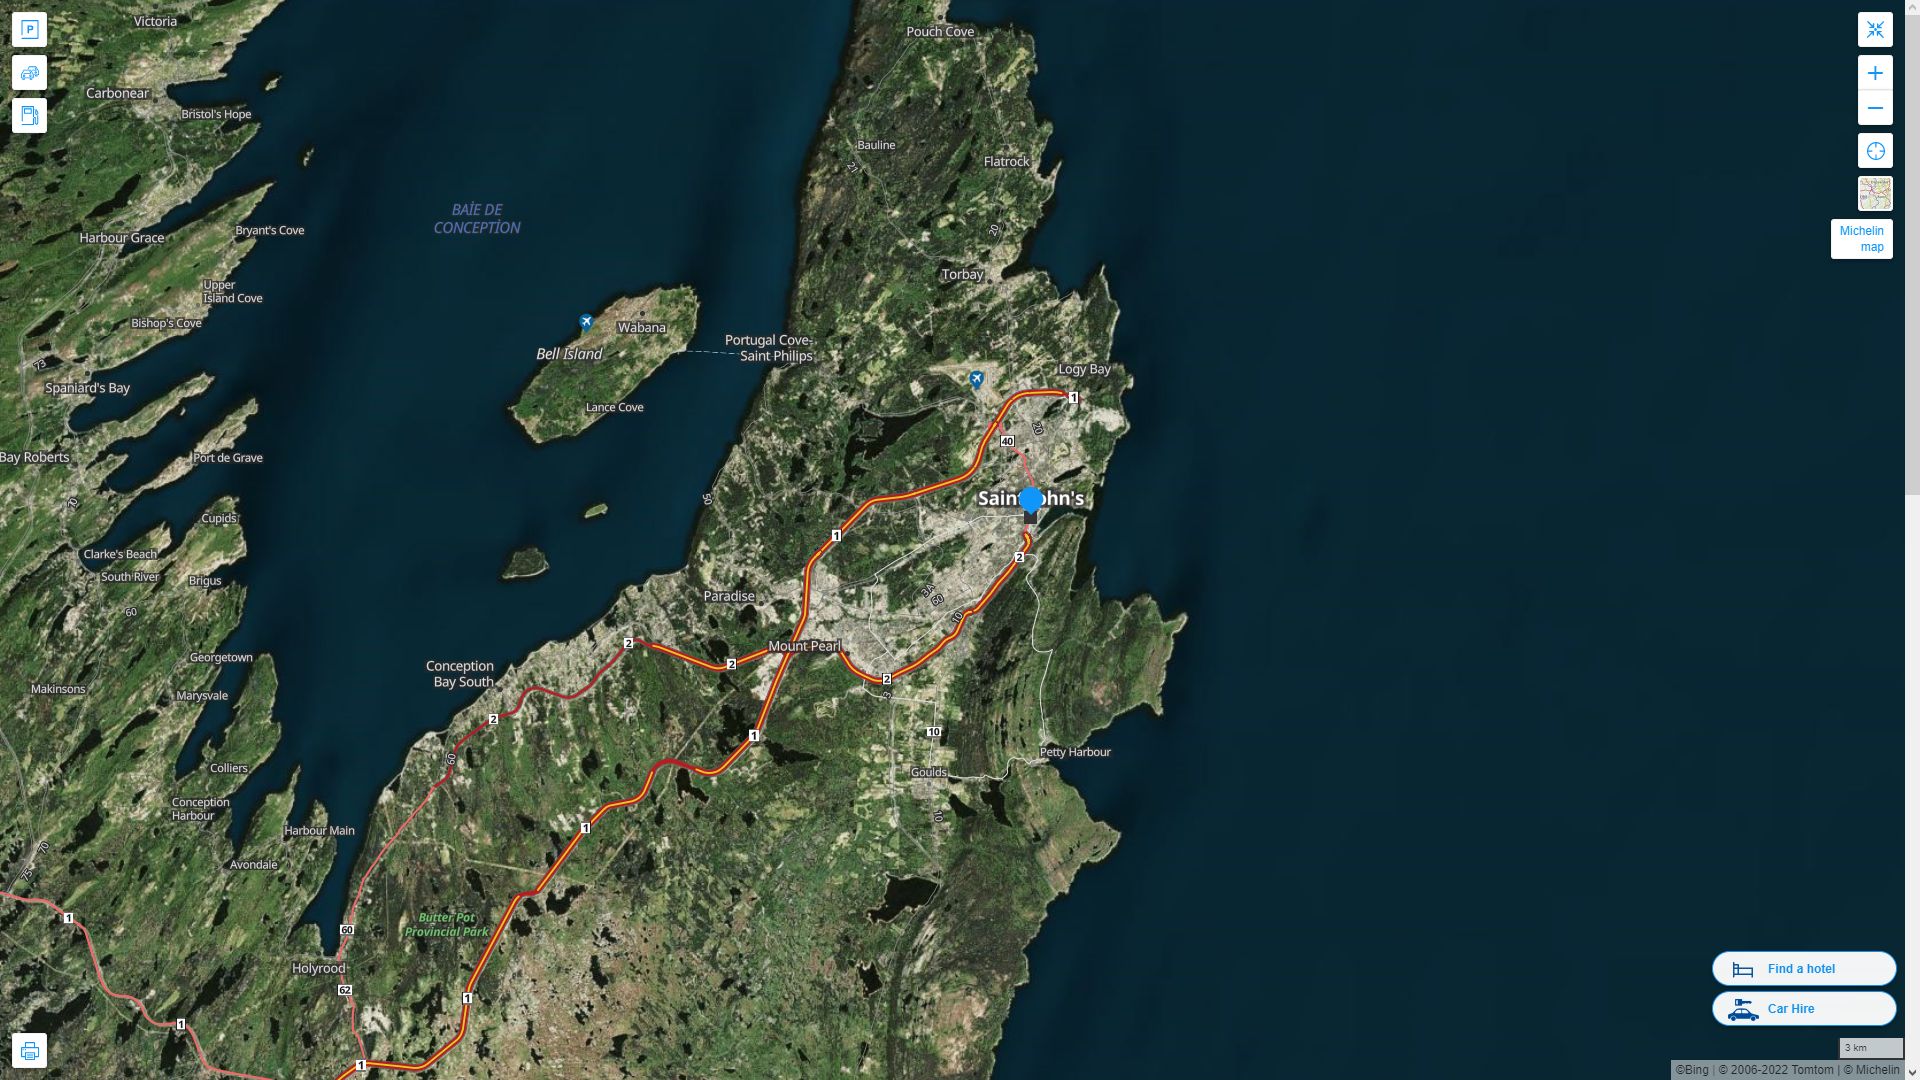 St. John's Highway and Road Map with Satellite View